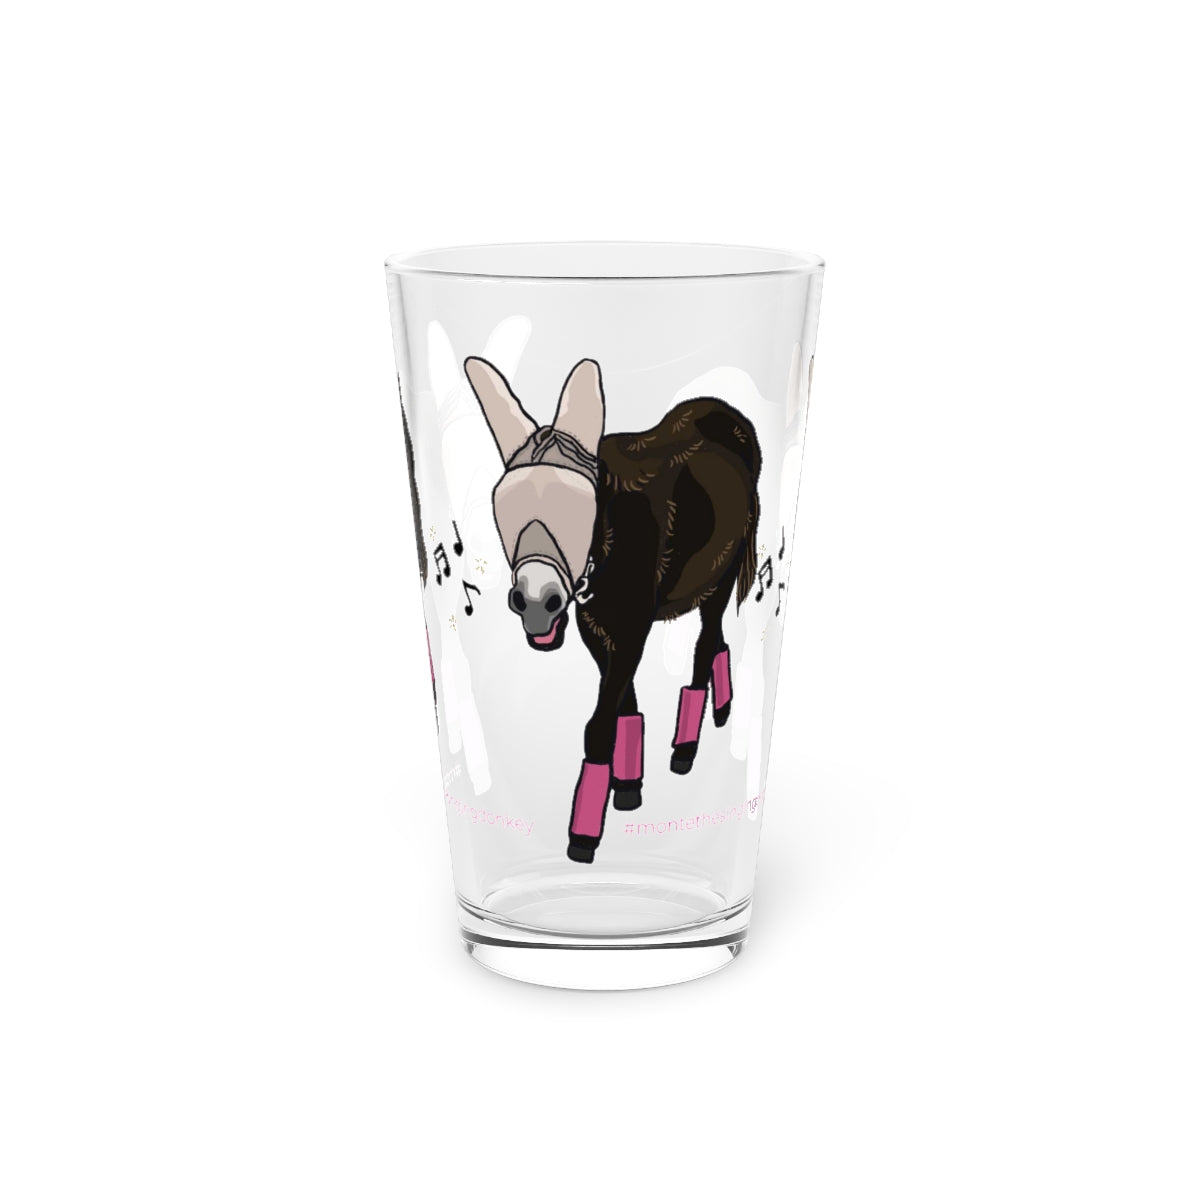 Monte the Singing Donkey - Fly Gear Pint Glass, 16oz